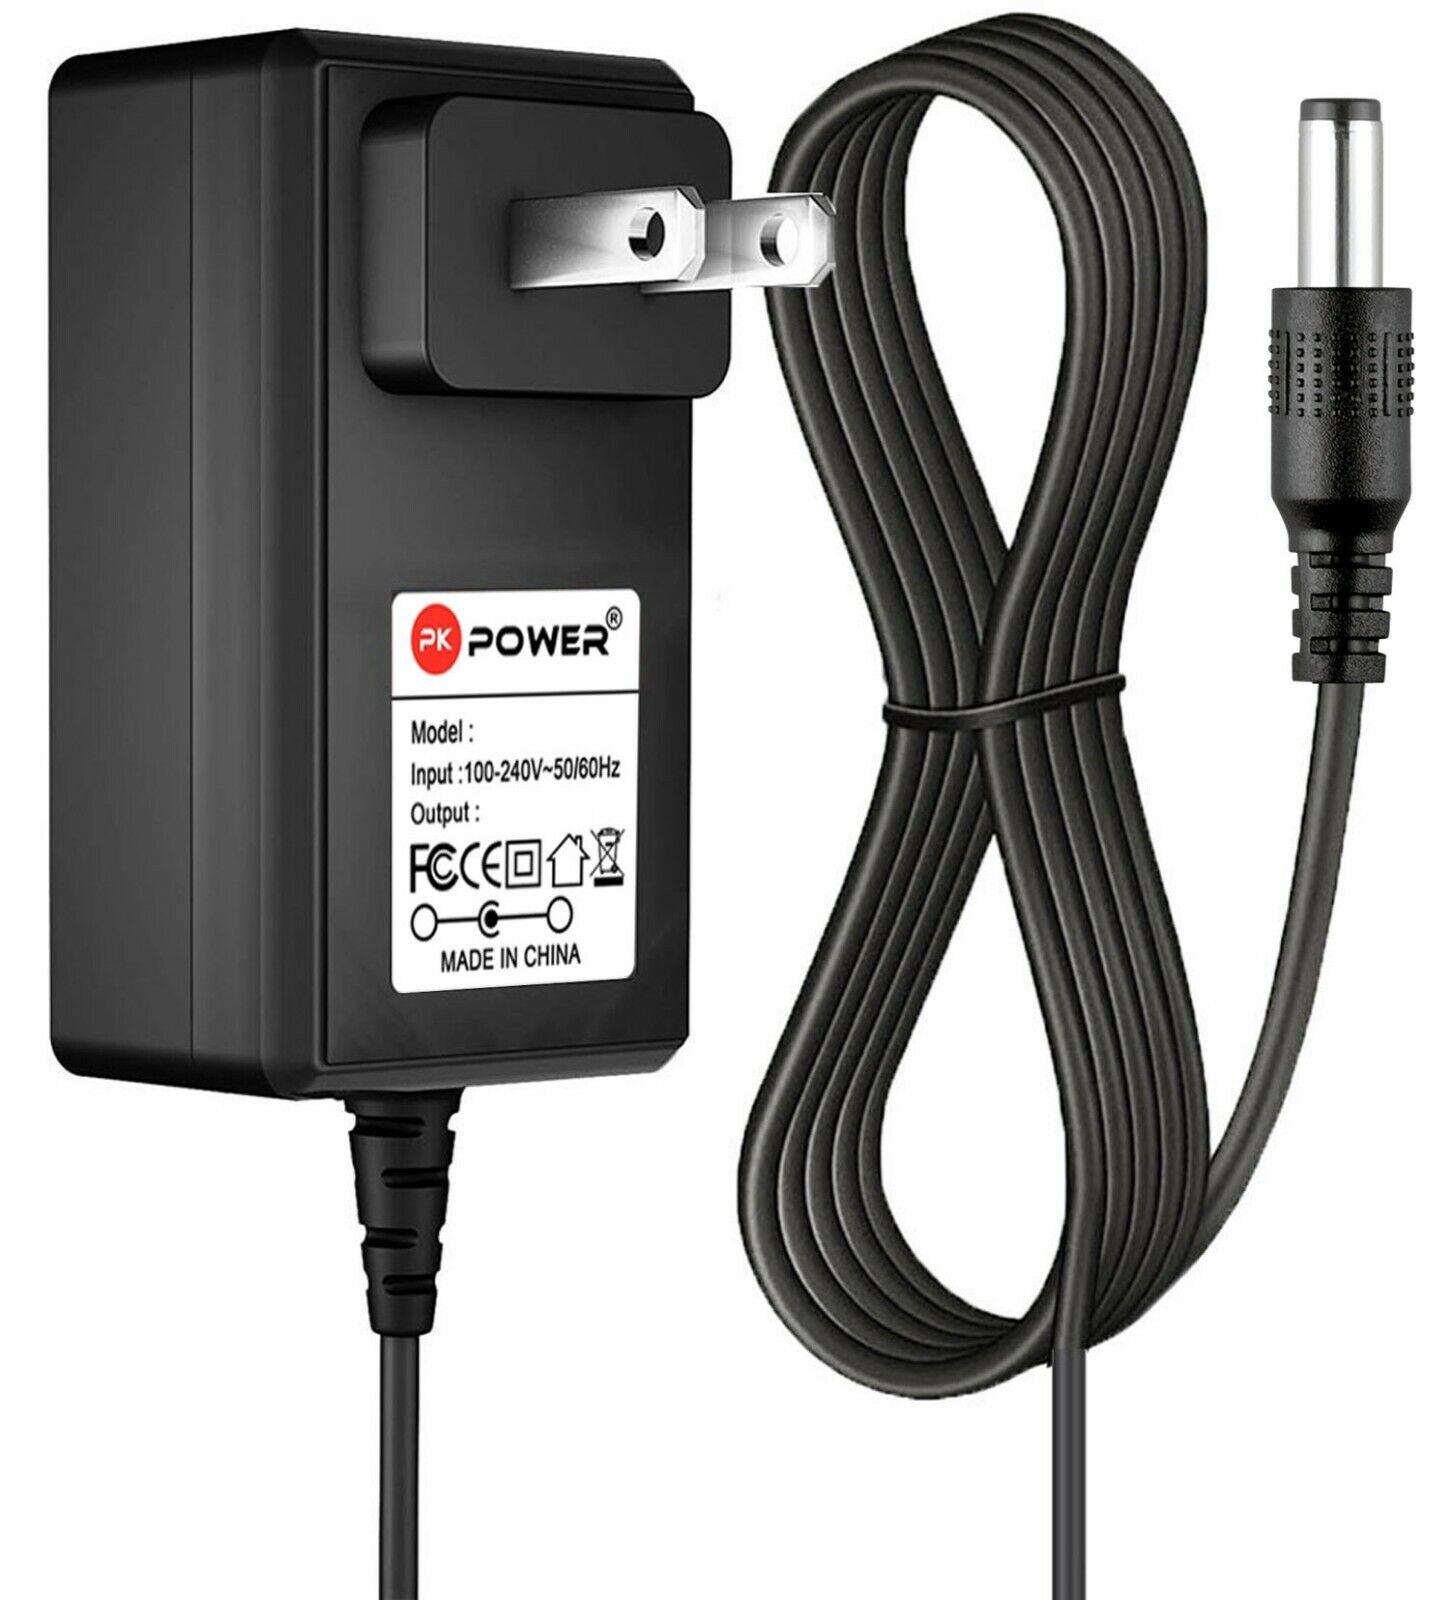 Pkpower Adapter for iRobot Braava 380 320 321 Floor Mopping Robot Cleaner Mains PKPOWER Does not apply - фотография #2